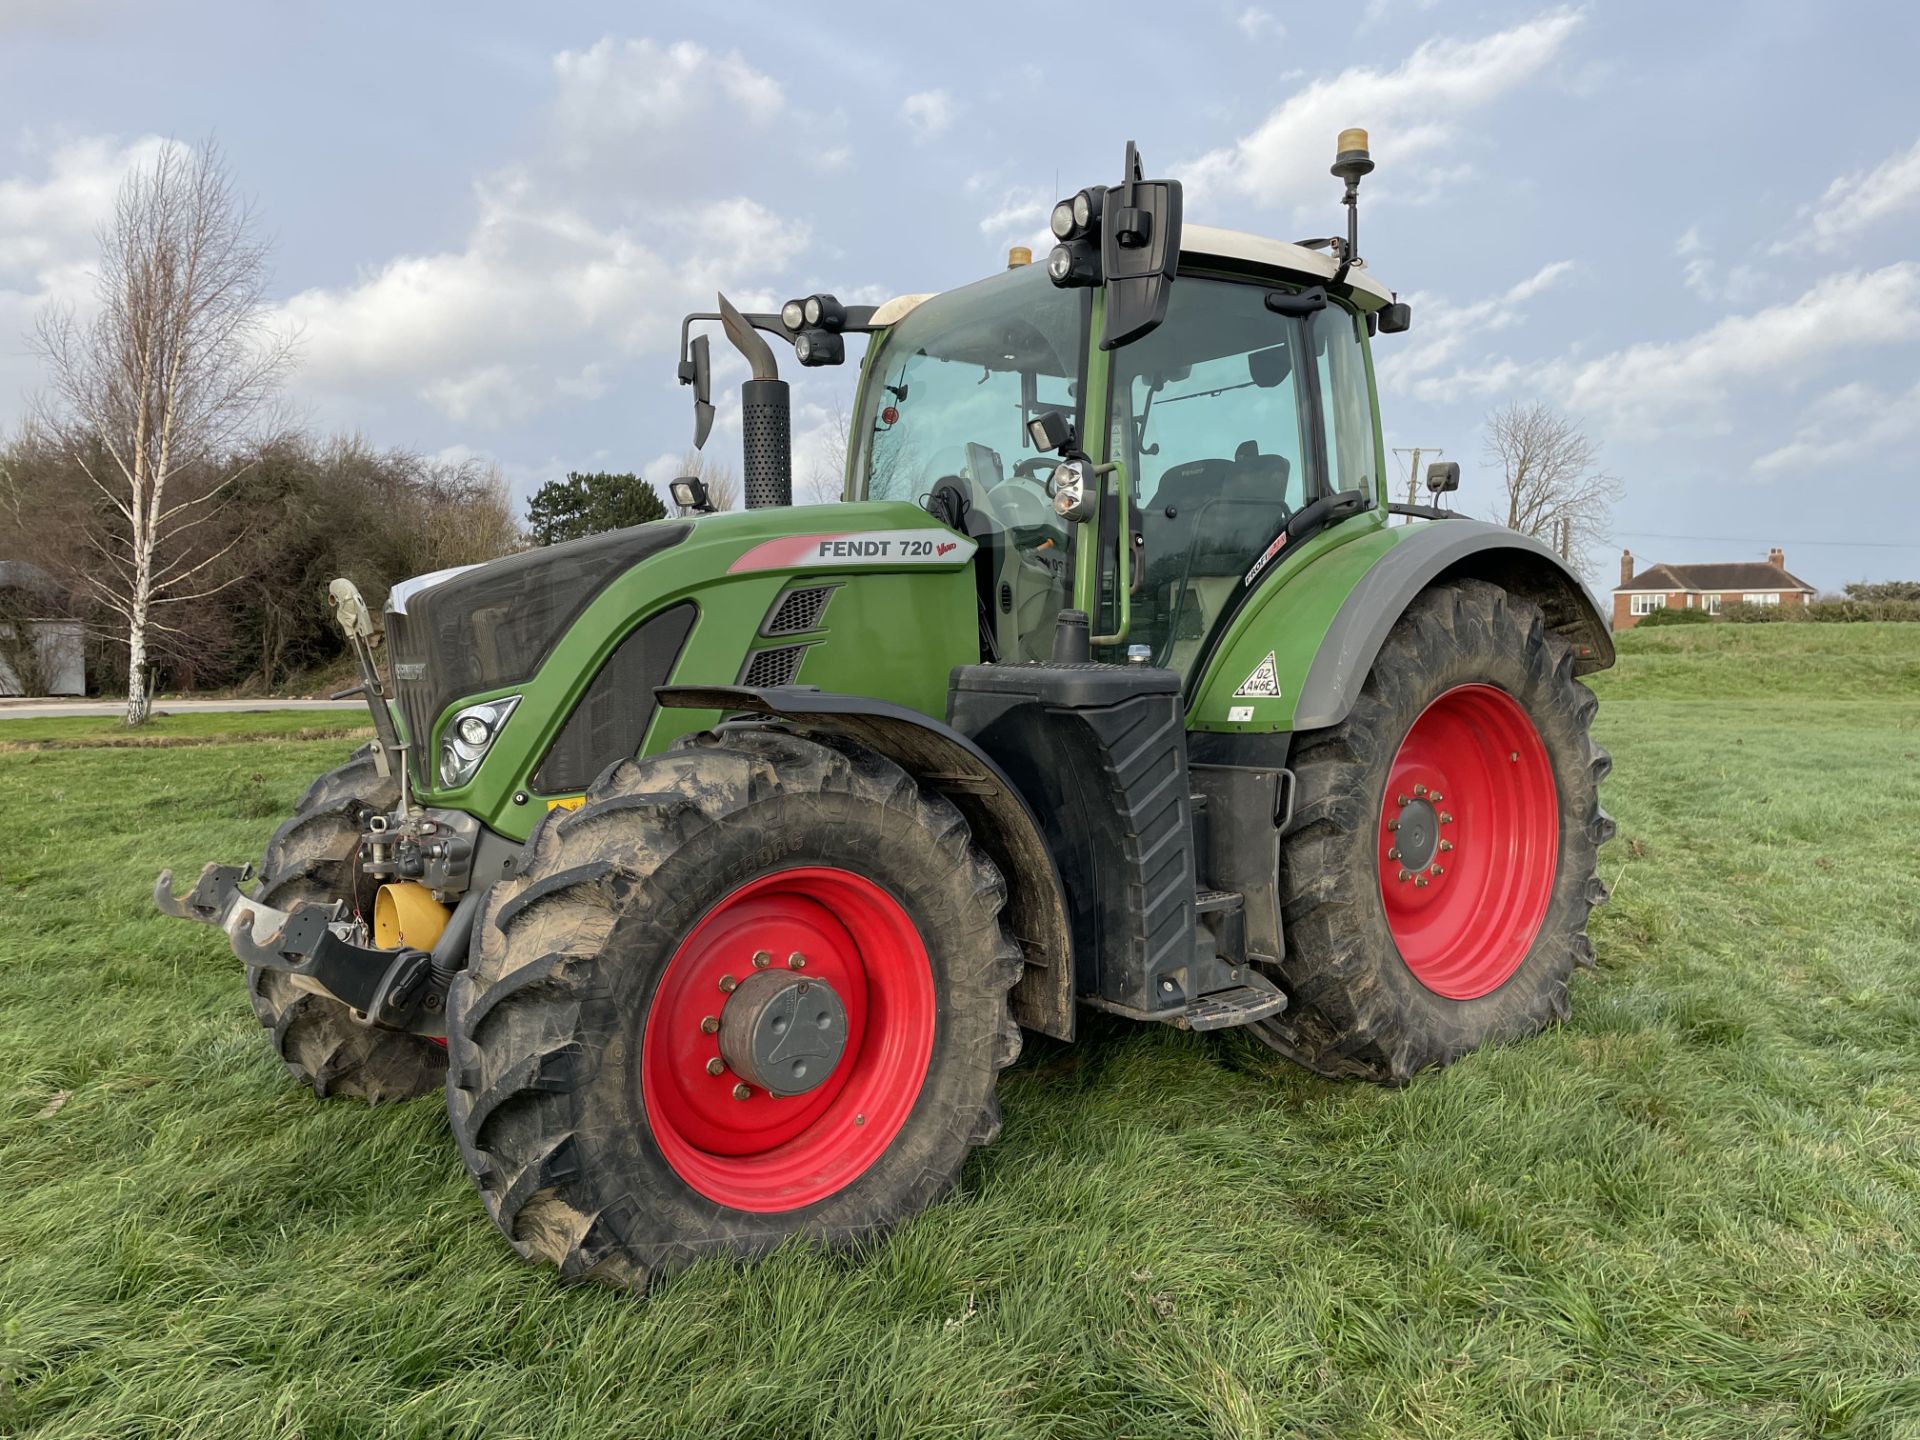 (18) Fendt 720 Vario S4 Profiplus 4wd tractor • Front linkage & PTO • Hydraulic return flow - Image 2 of 10